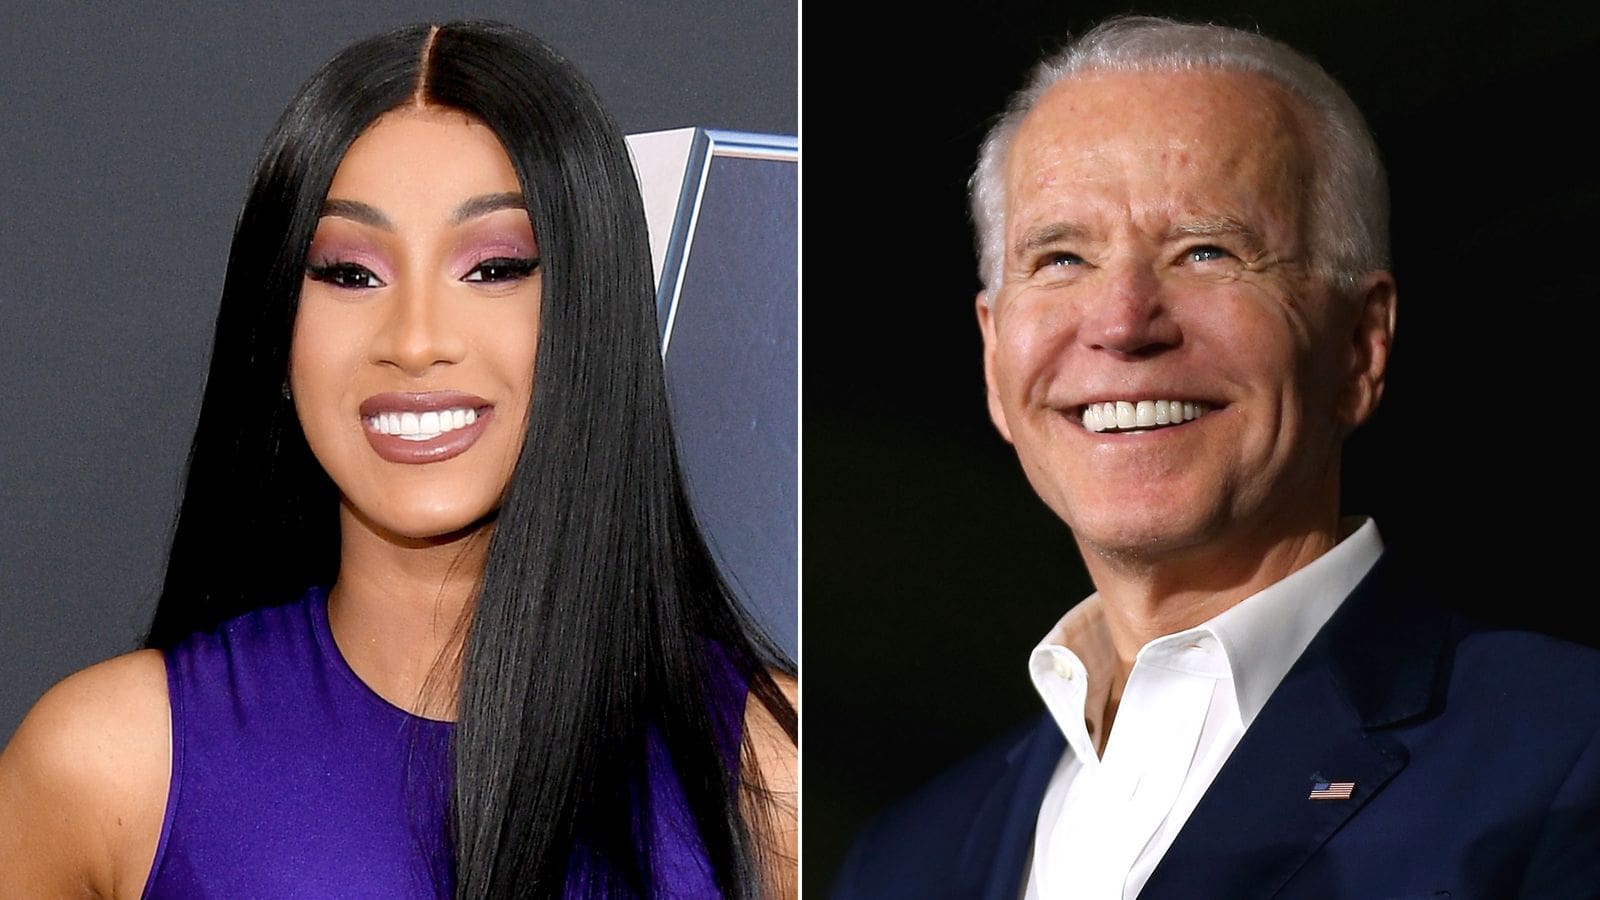 Cardi B Called Out Joe Biden As She Slammed New York City’s Proposed Budget Cuts Affecting Public Libraries, Local Schools, And More [Video]